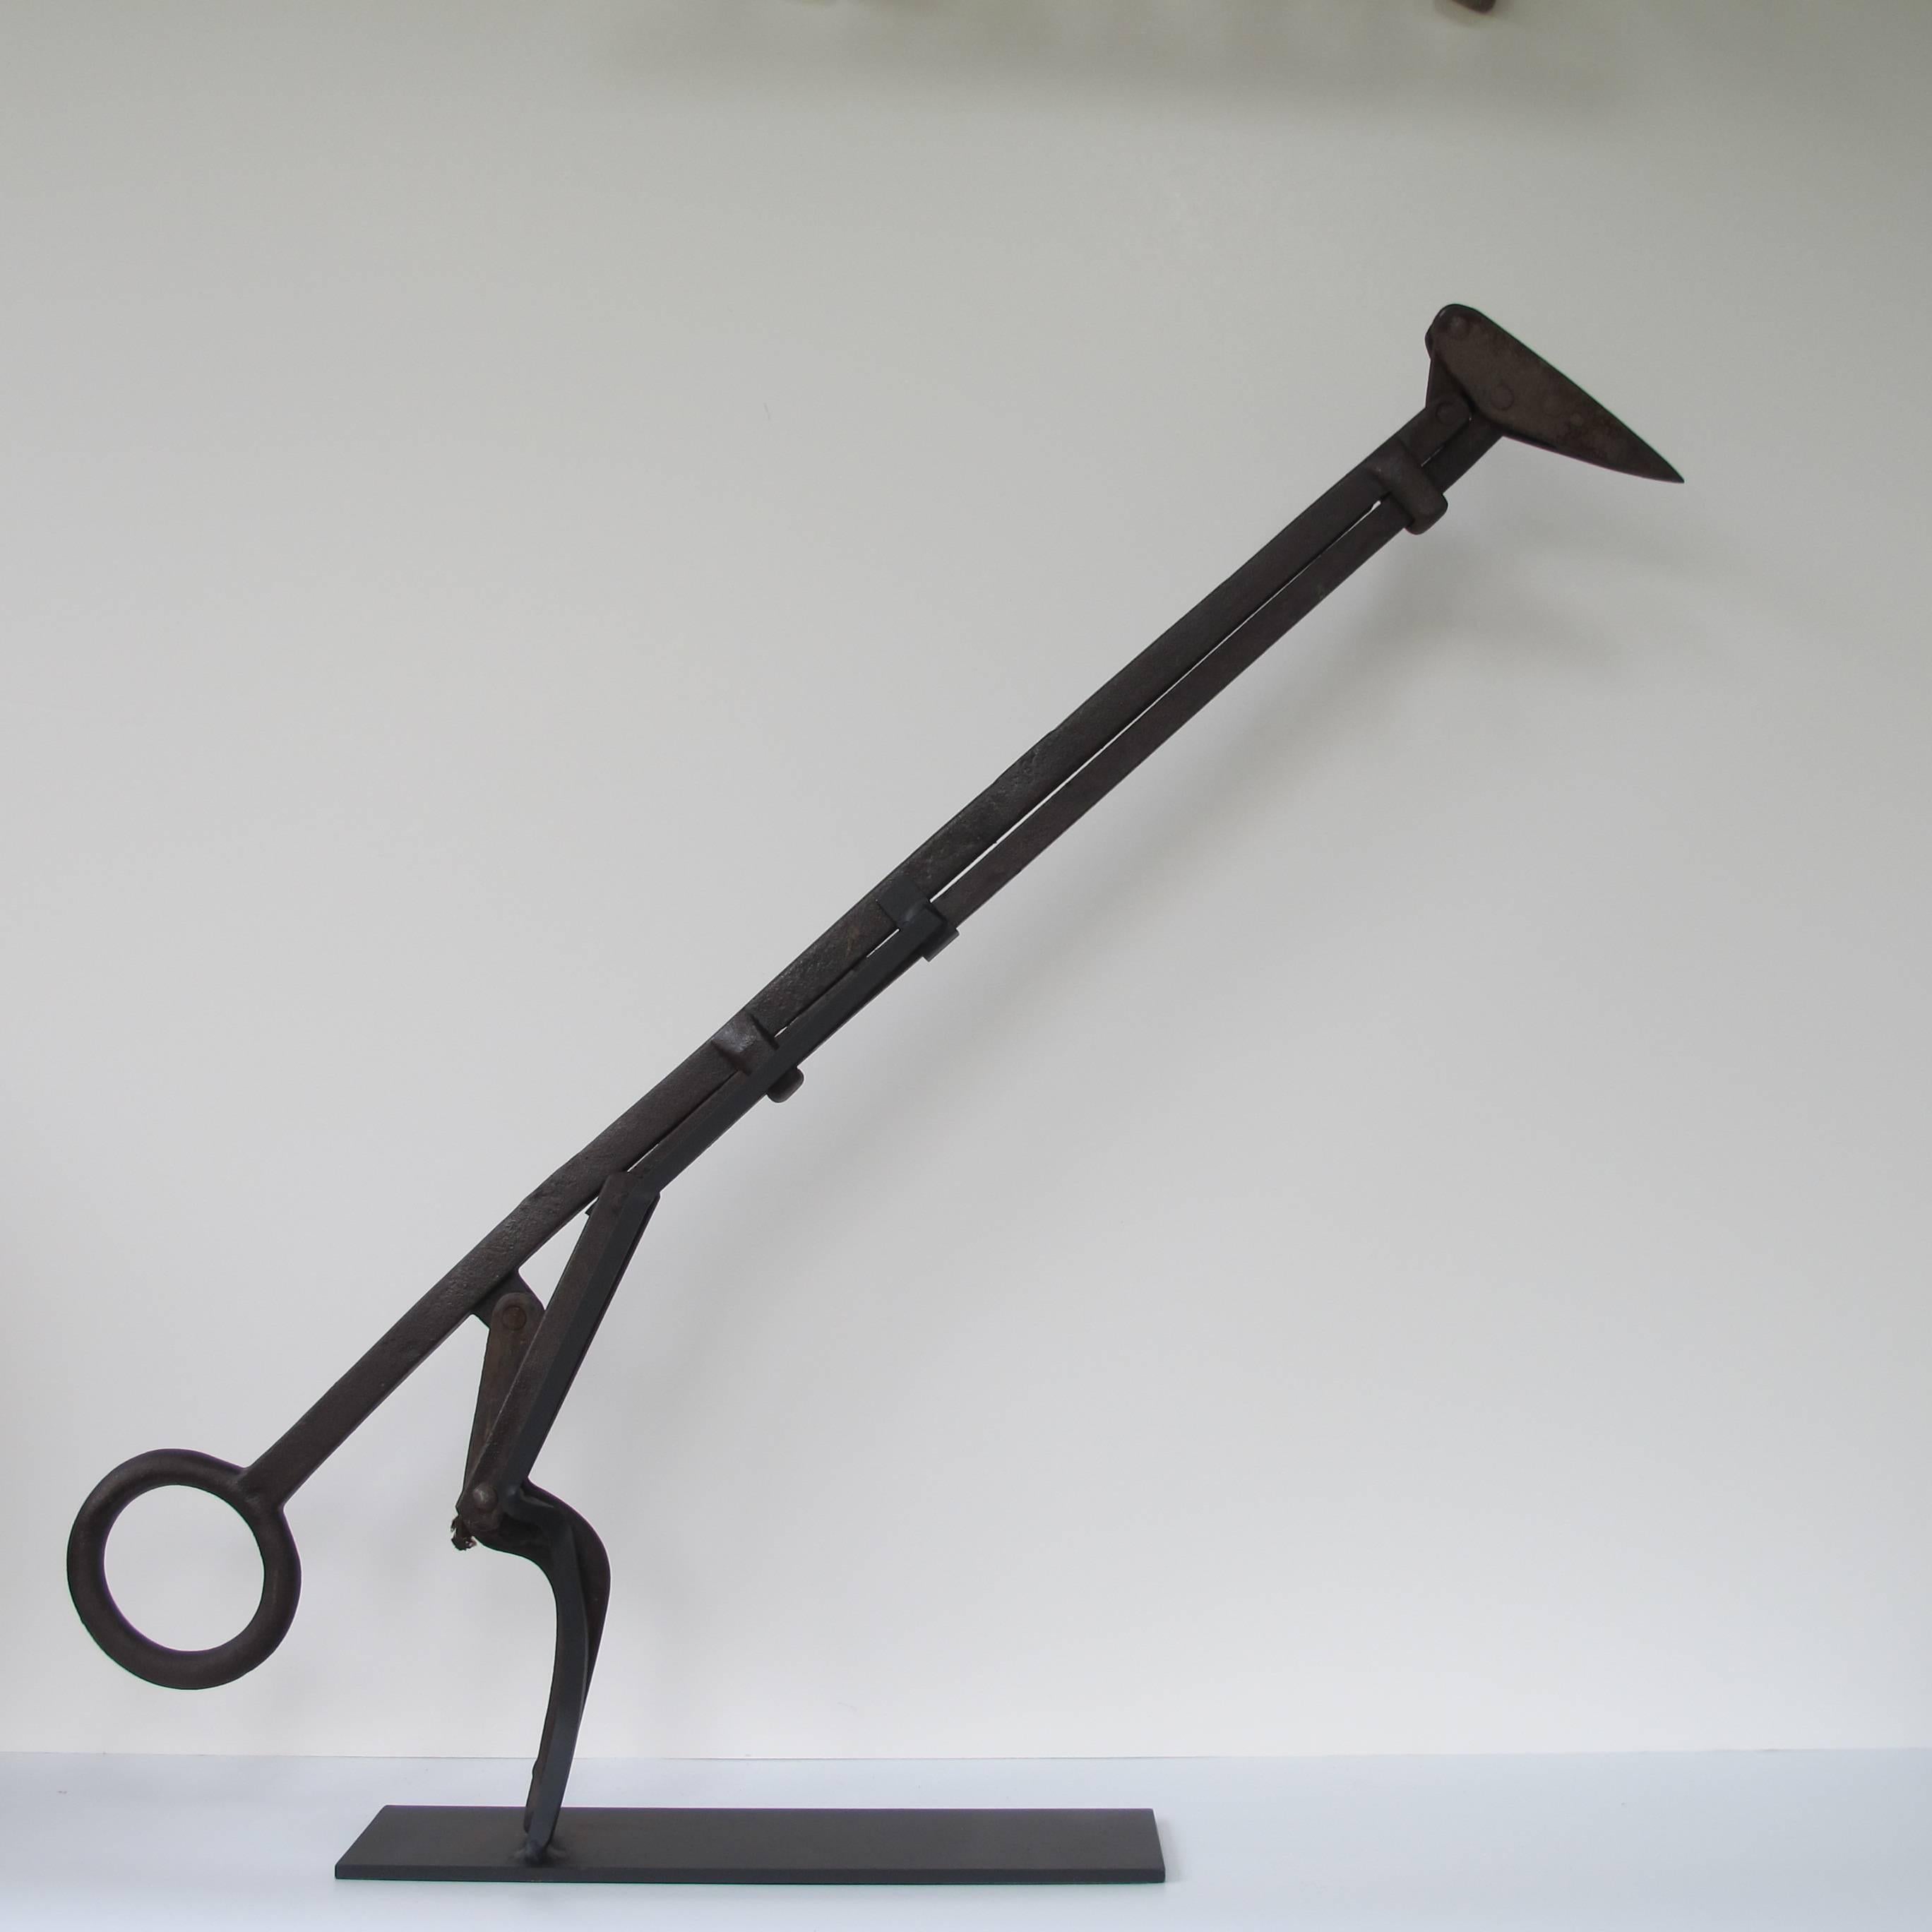 Mechanical iron tool for retrieving bales of hay. The nose spike goes into the hay bale and tilts from the handle to pull the bale of hay.
Mounted on an American Primitive black metal base at a raking 'bird-like' angle.